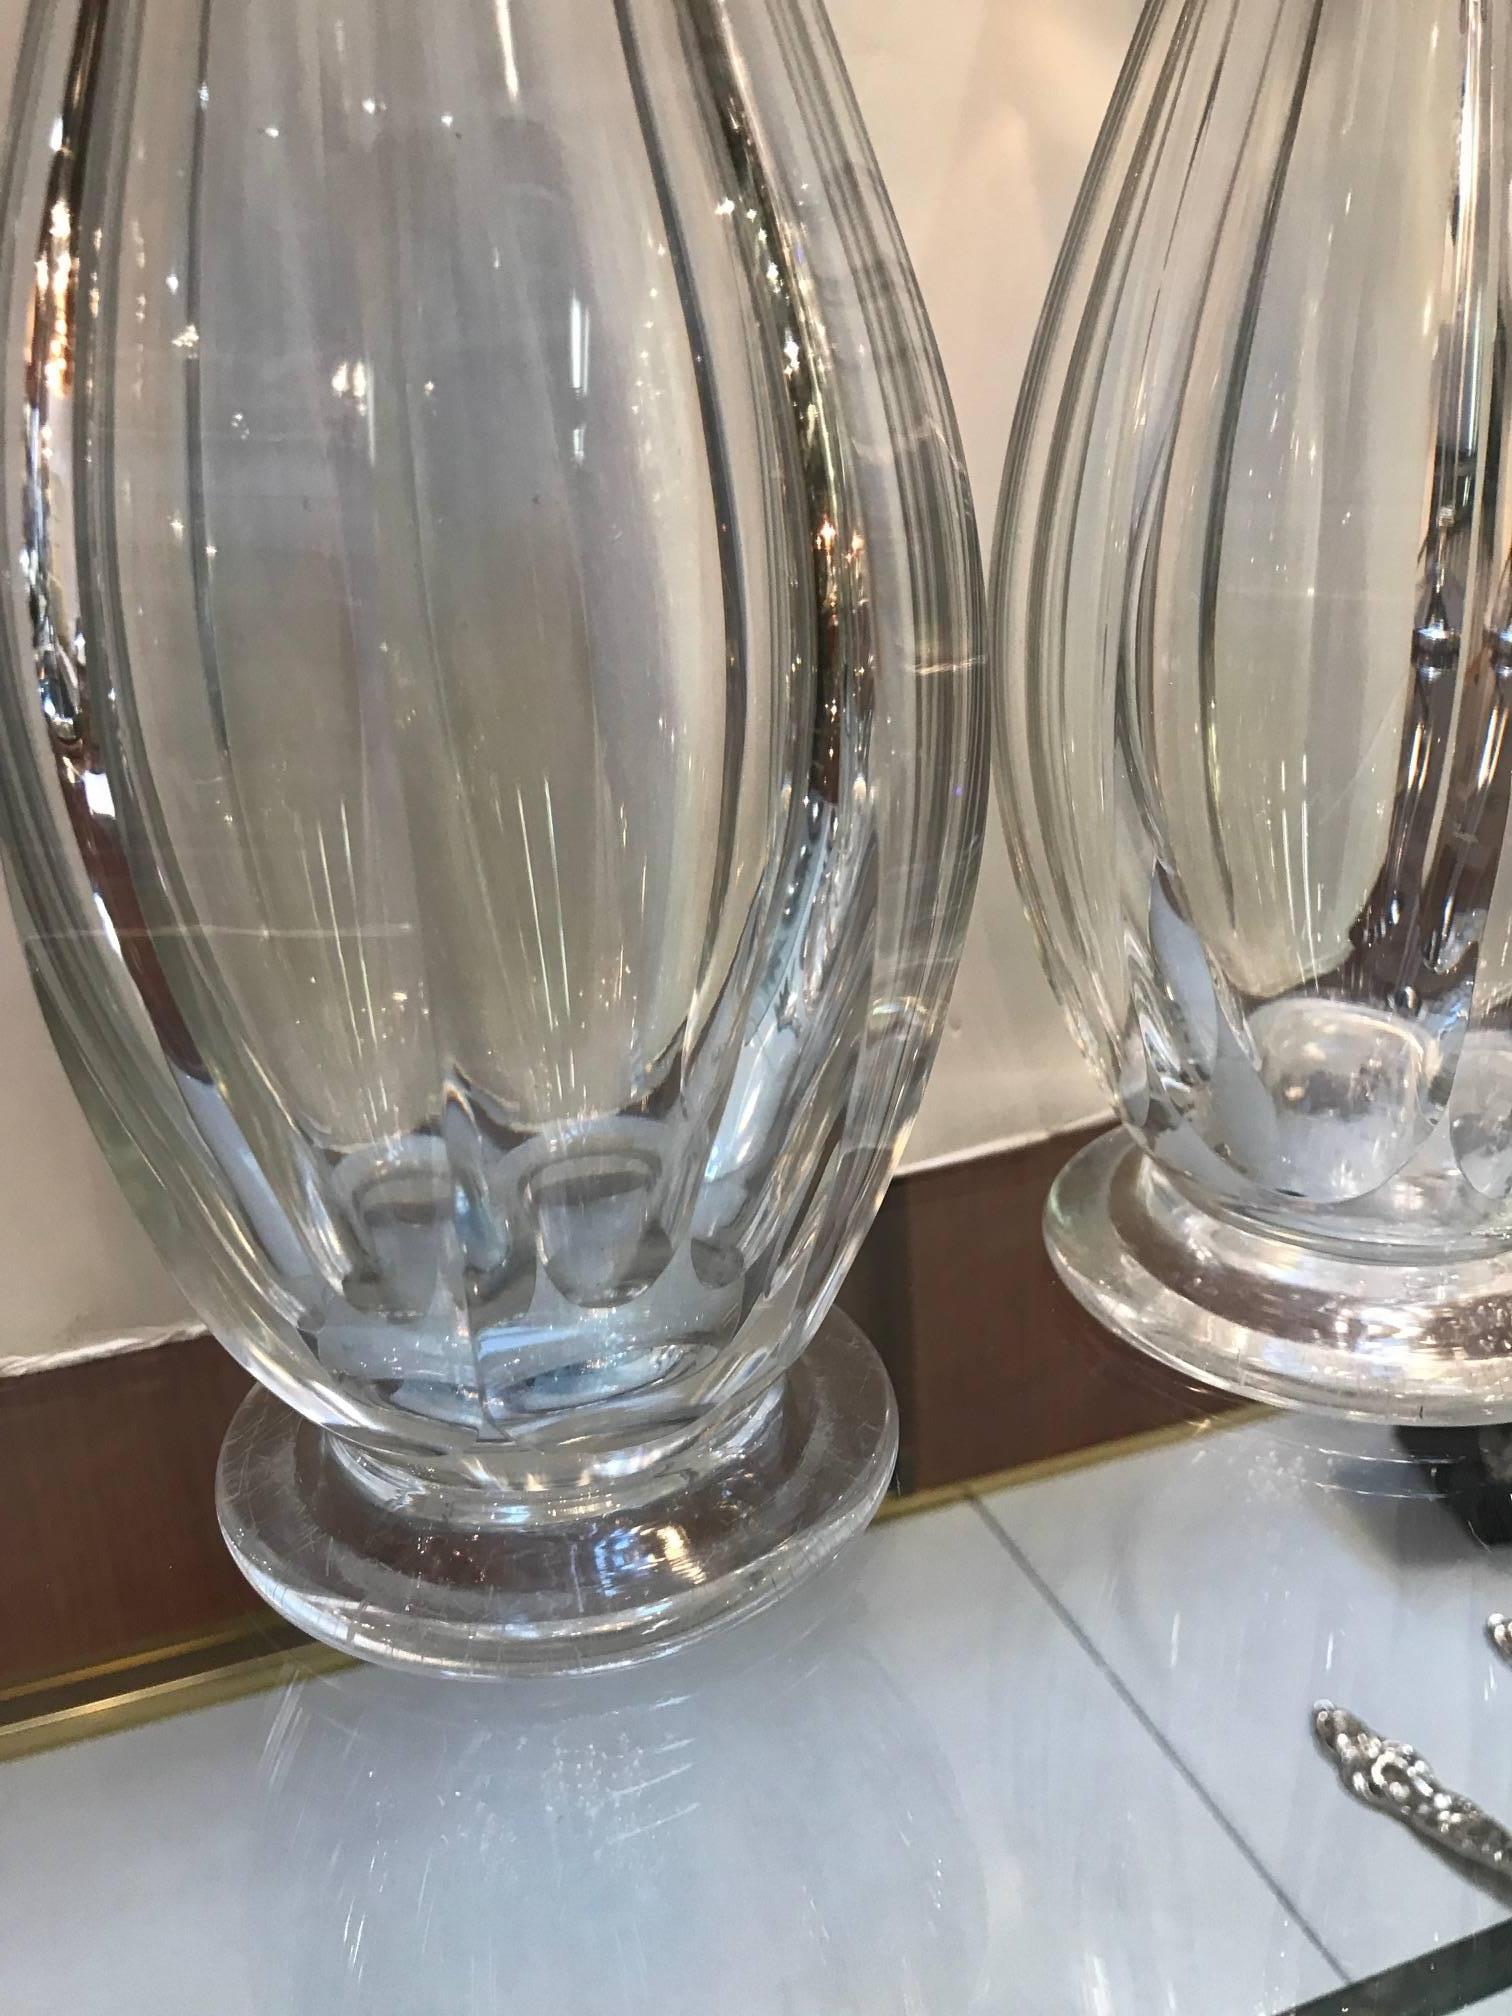 Pair of blown flint glass decanters, circa 1840. The hand-cut panel cut sides topped with multifaceted stoppers. The bottoms have a polished pontil showing these were hand made by an expert glass blower and cutter.
Flint glass refers to glass made